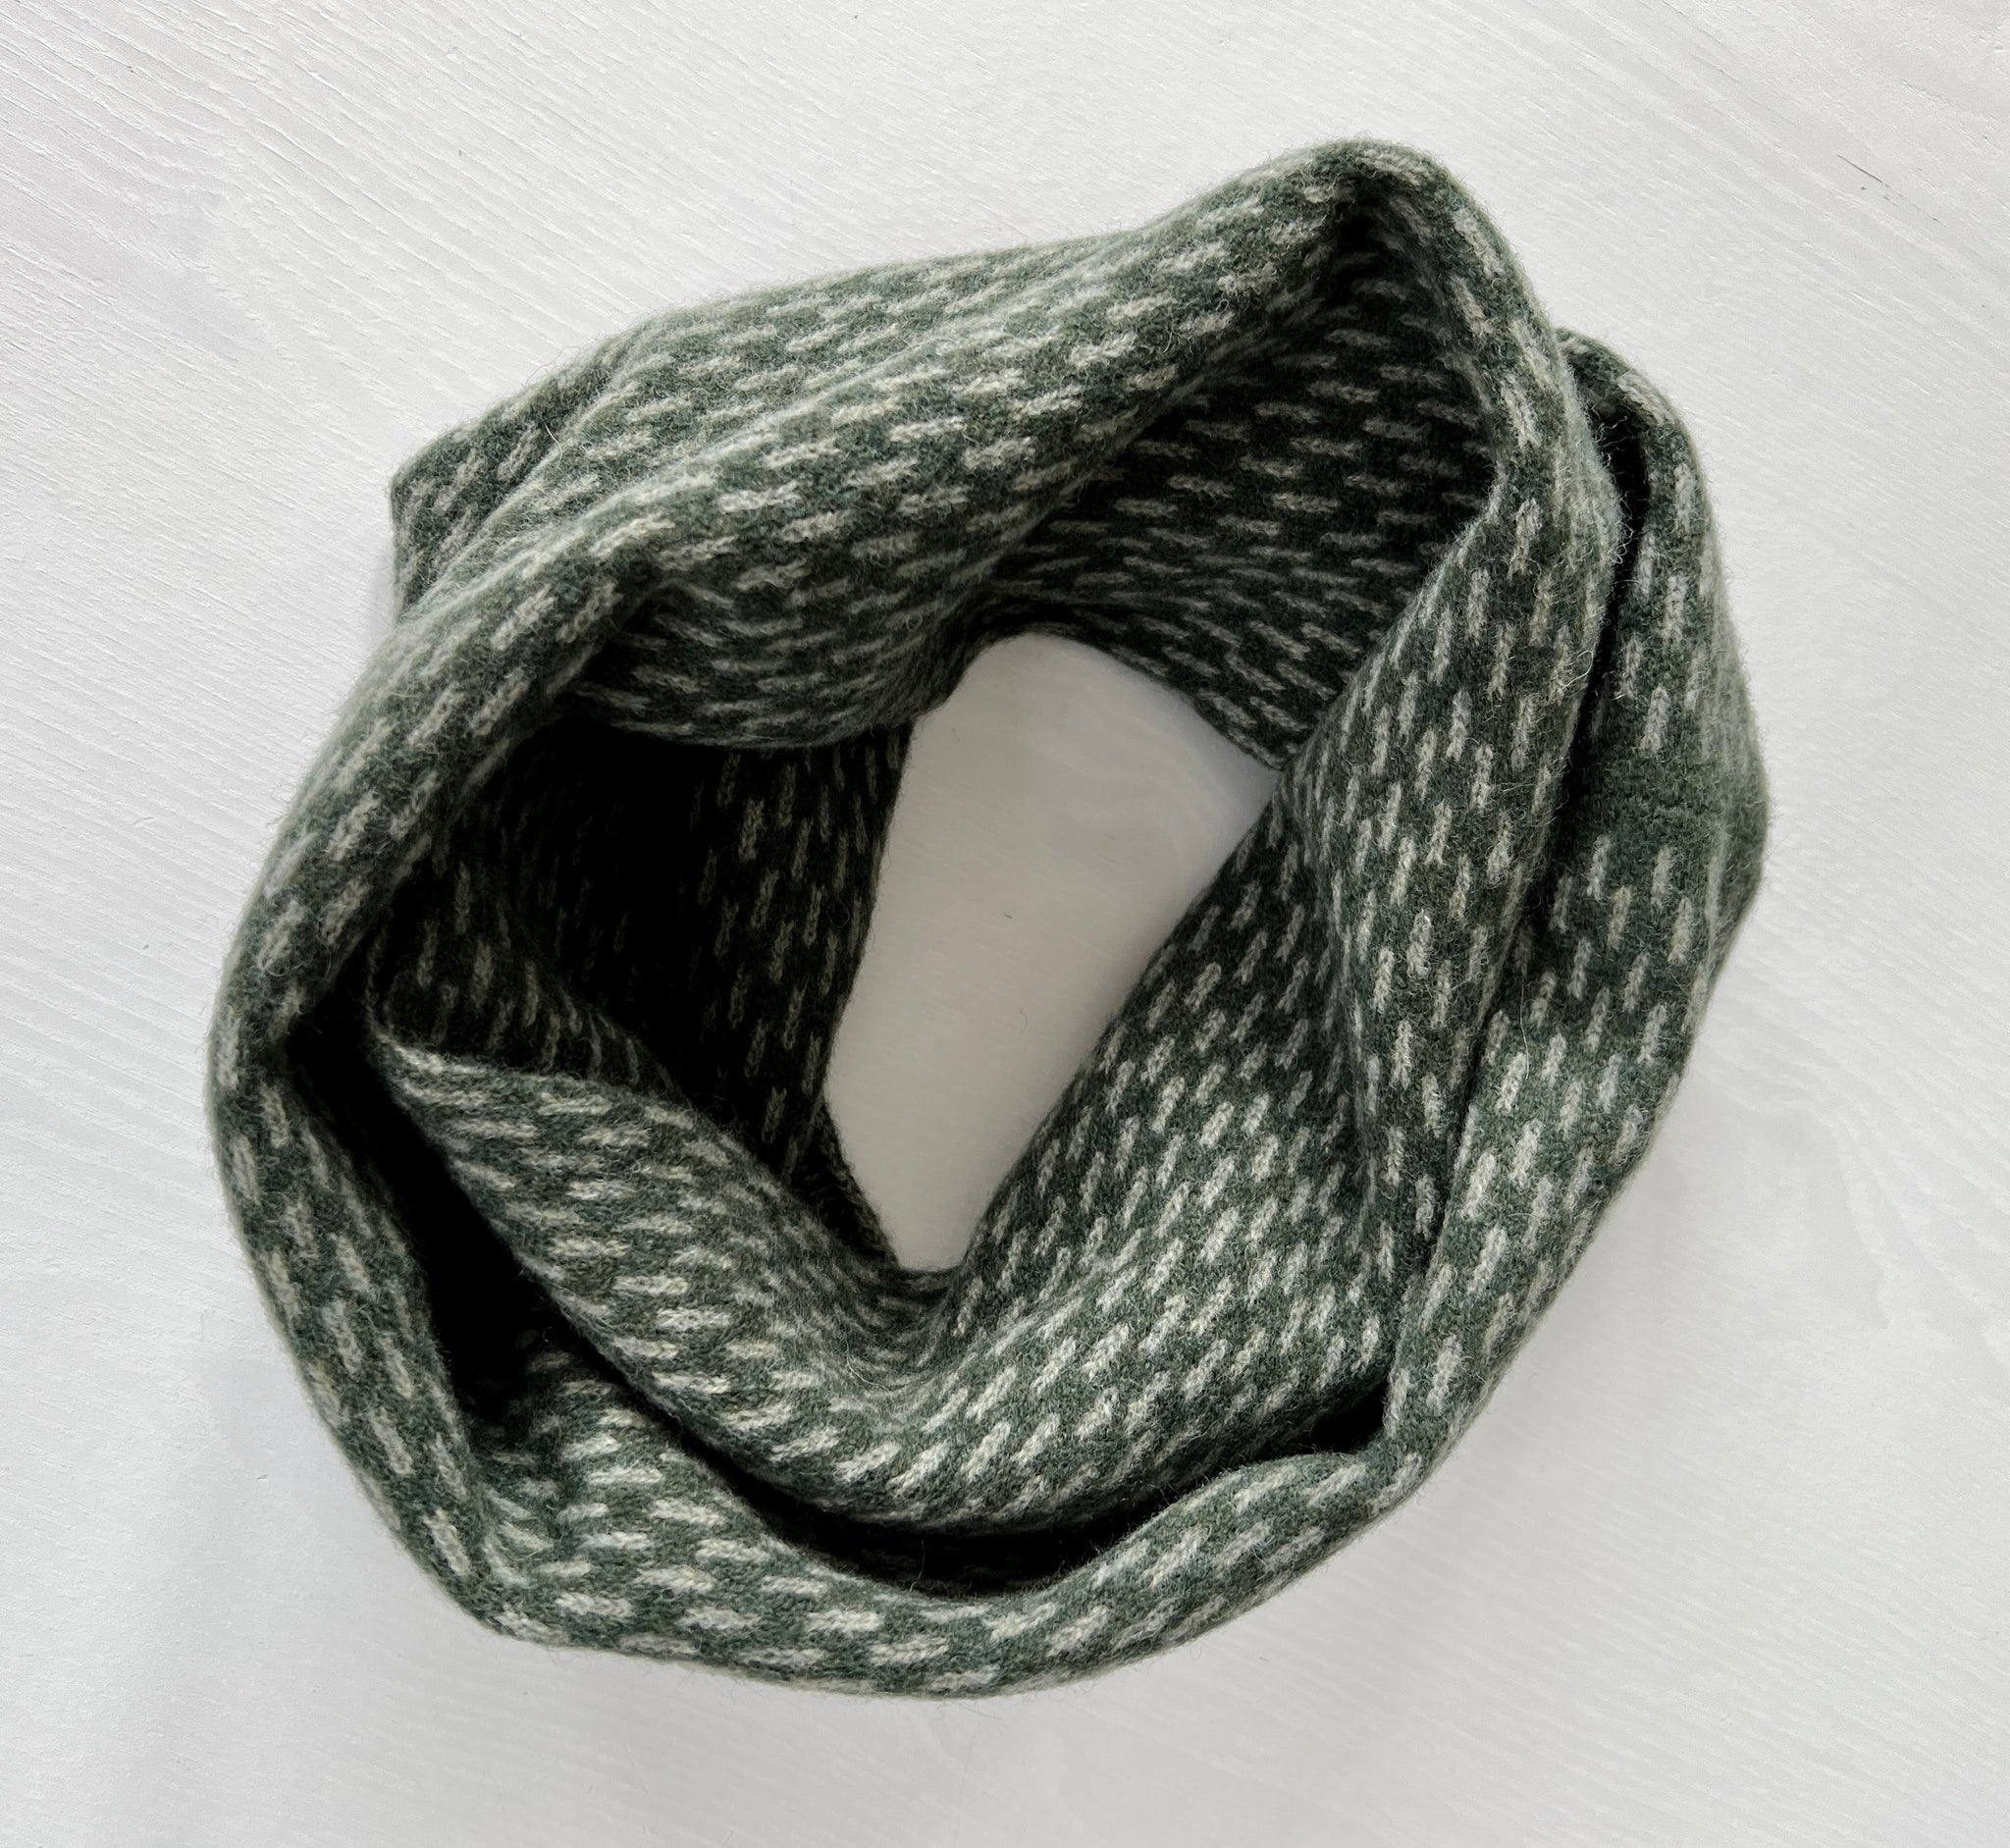 Snood - Infinity scarf soft merino lambswool rosemary green with orchard green dots